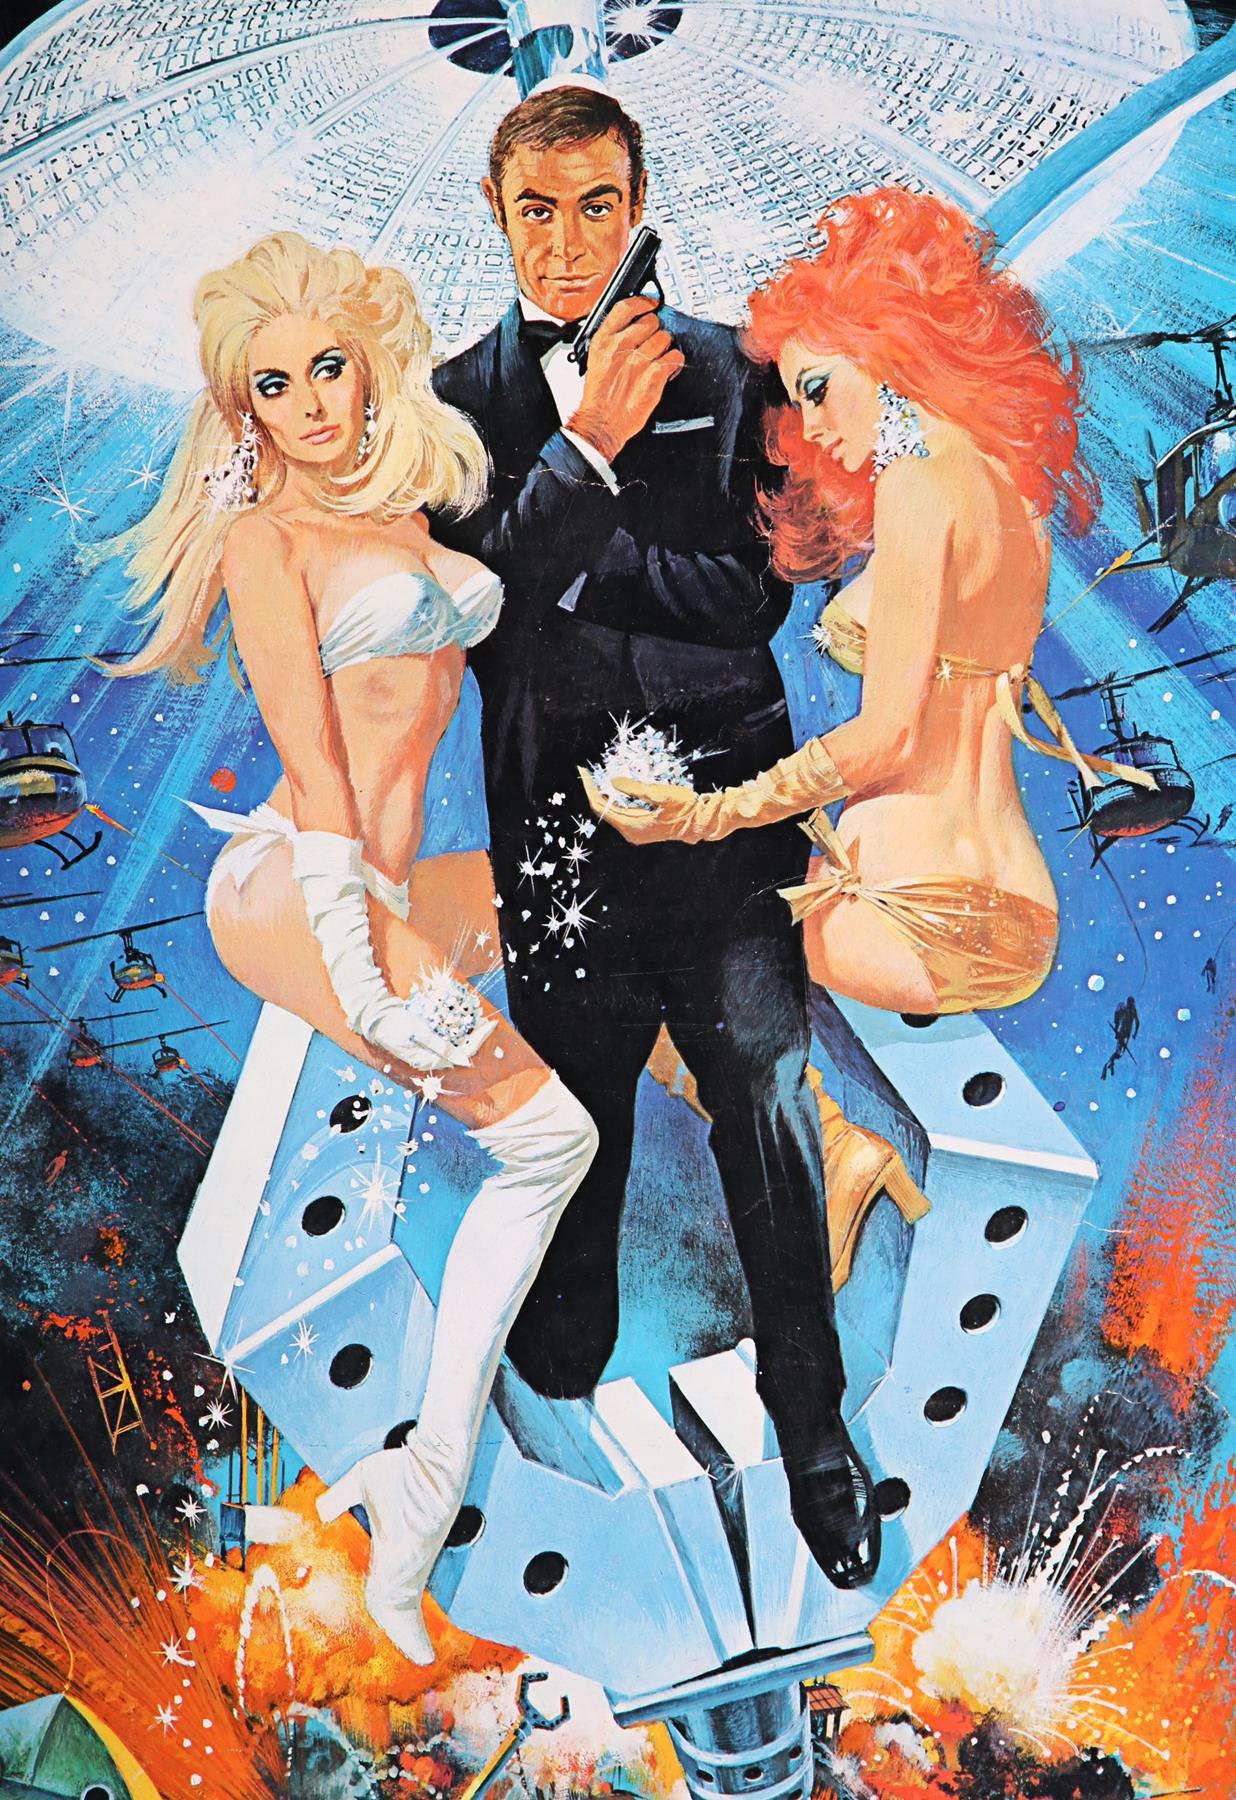 DIAMONDS ARE FOREVER (1971) - US 30x40 Poster, 1971 - Image 2 of 7